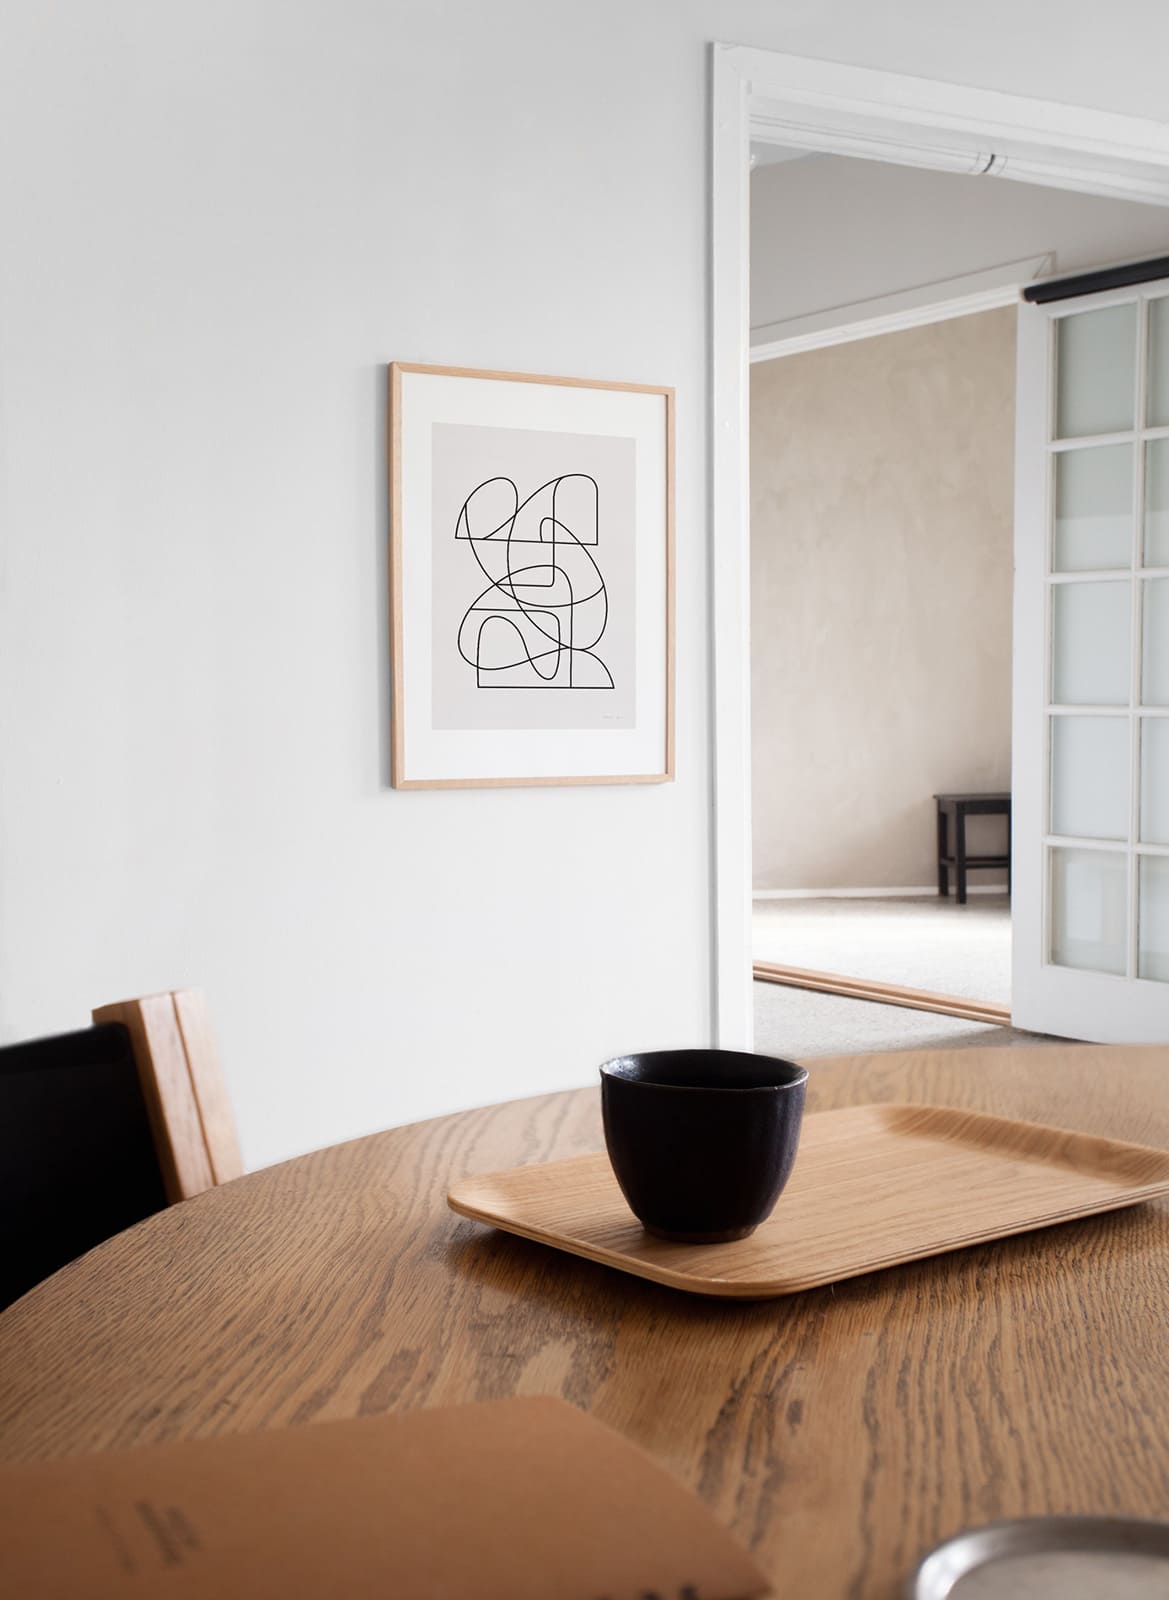 Framed minimalistic posters hanging above a desk/table by Atelier Cph